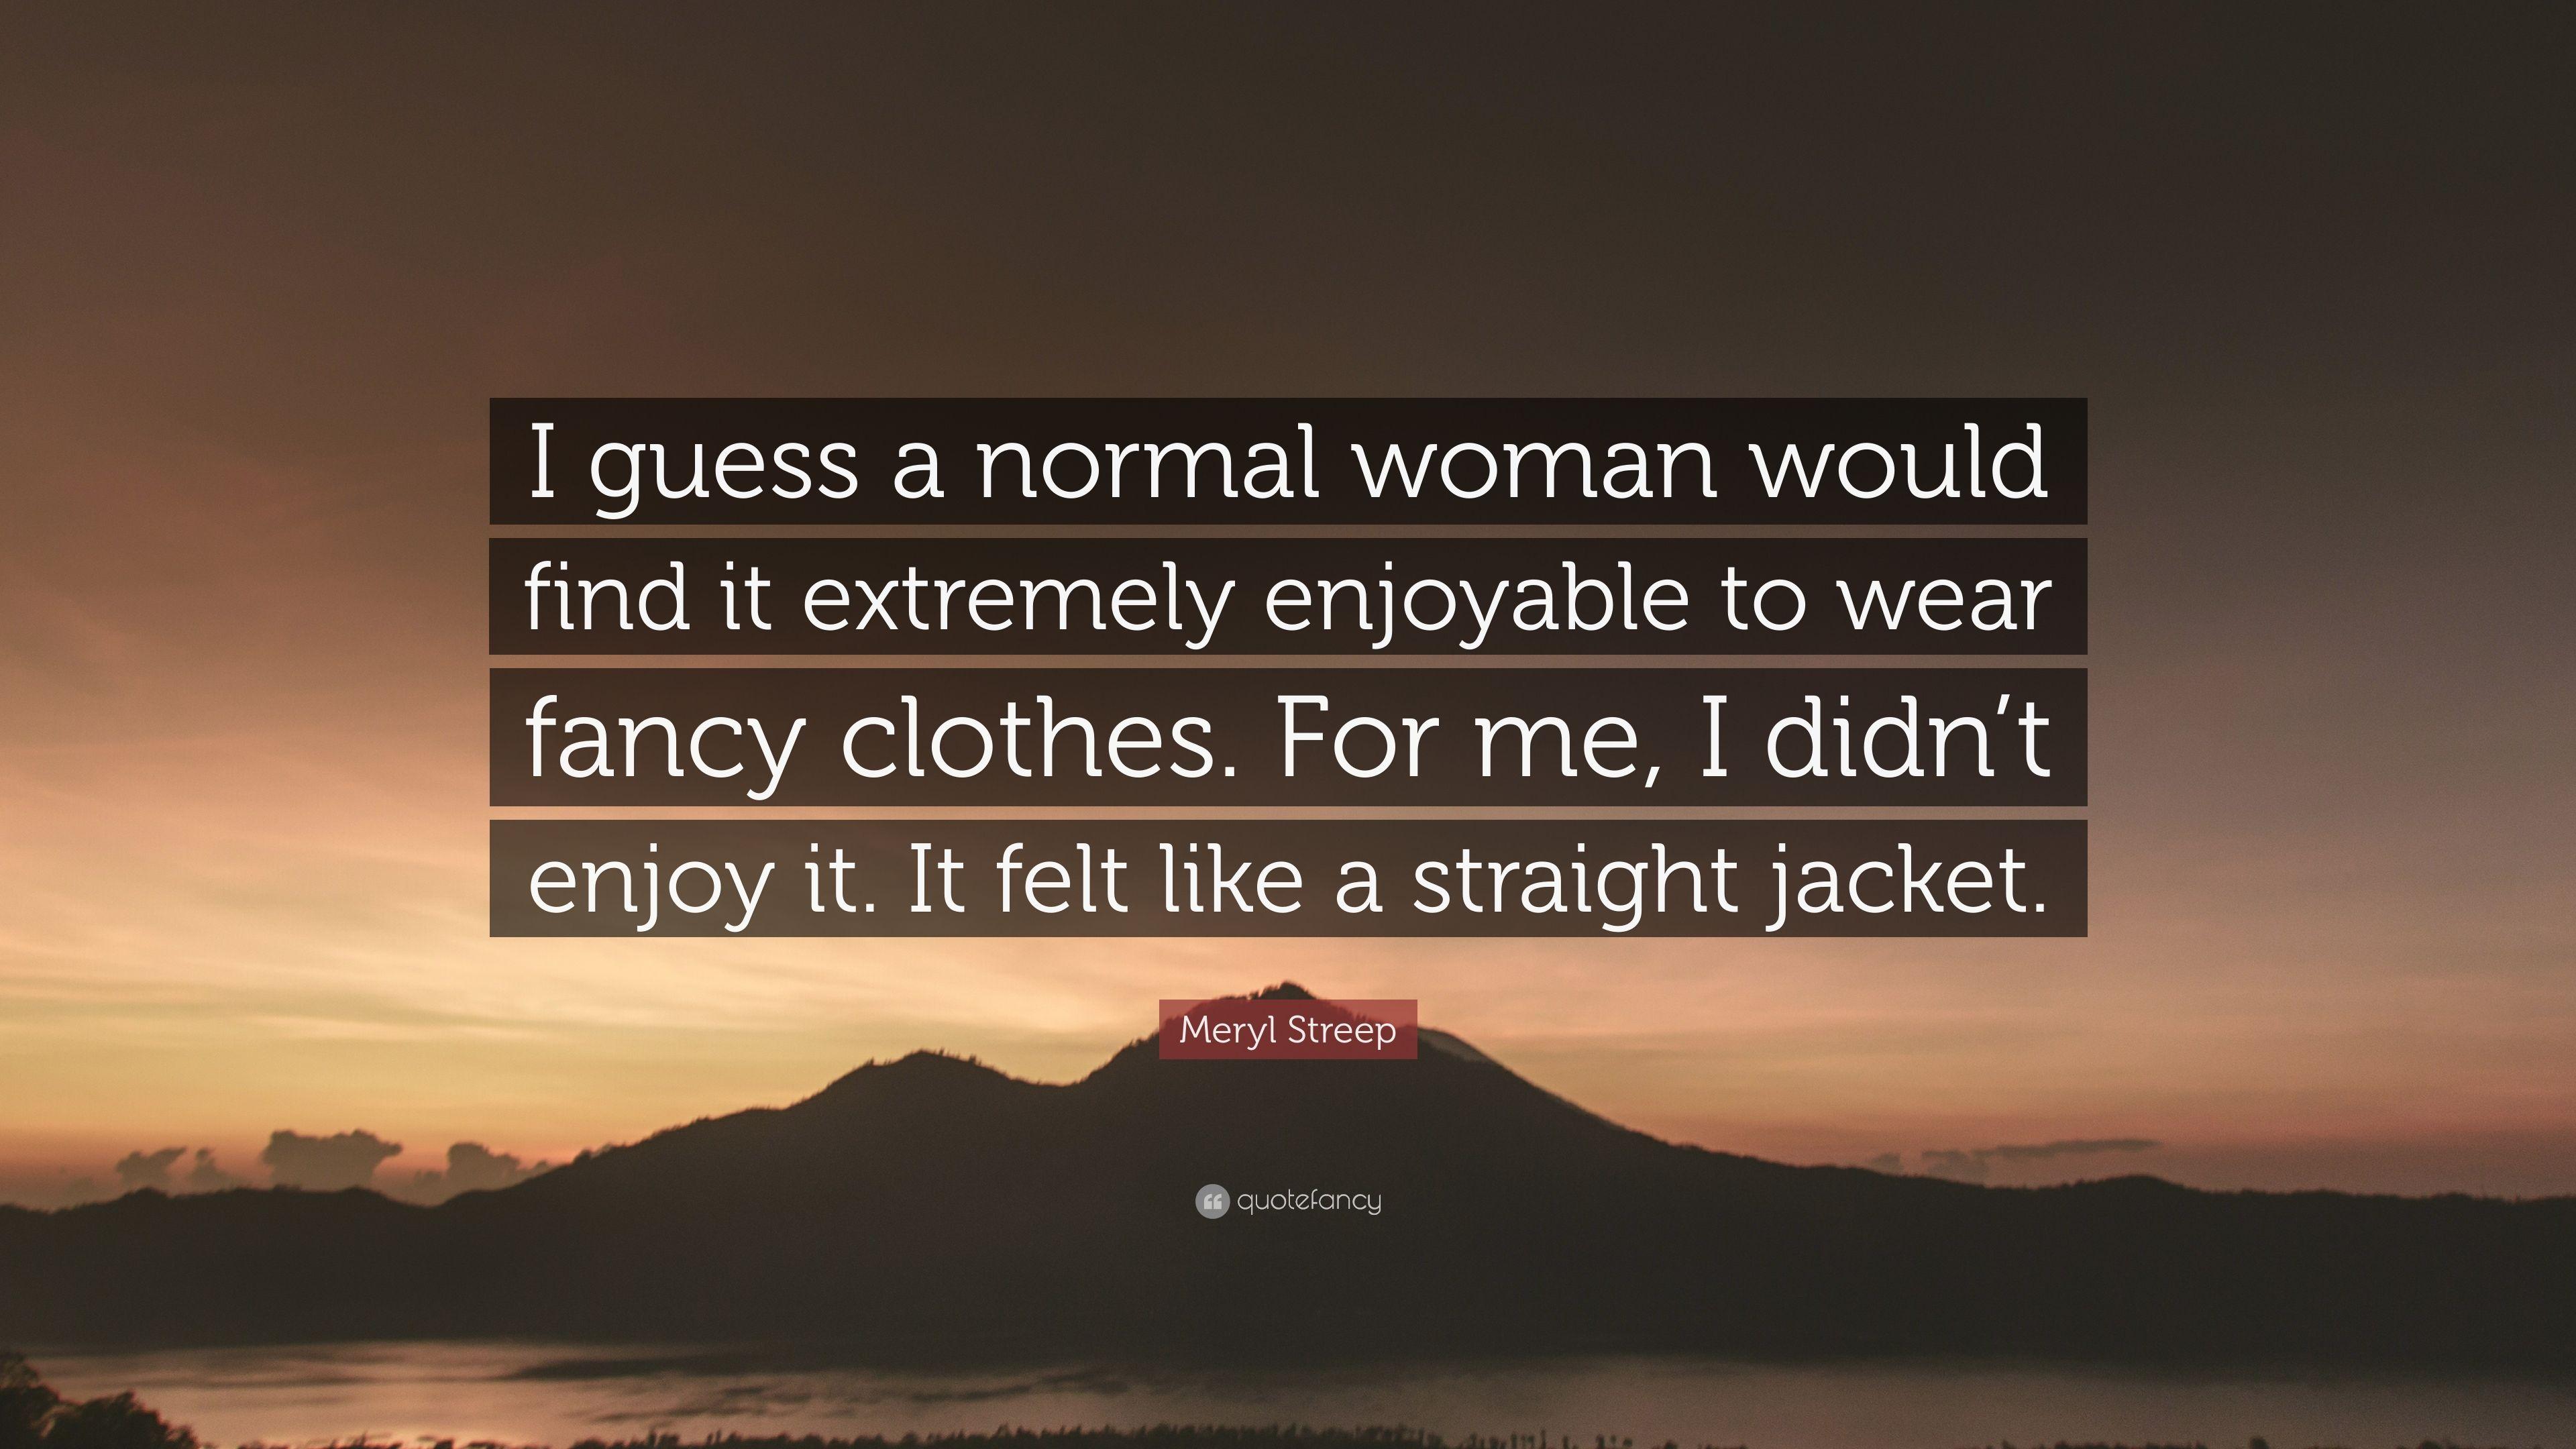 Meryl Streep Quote: “I guess a normal woman would find it